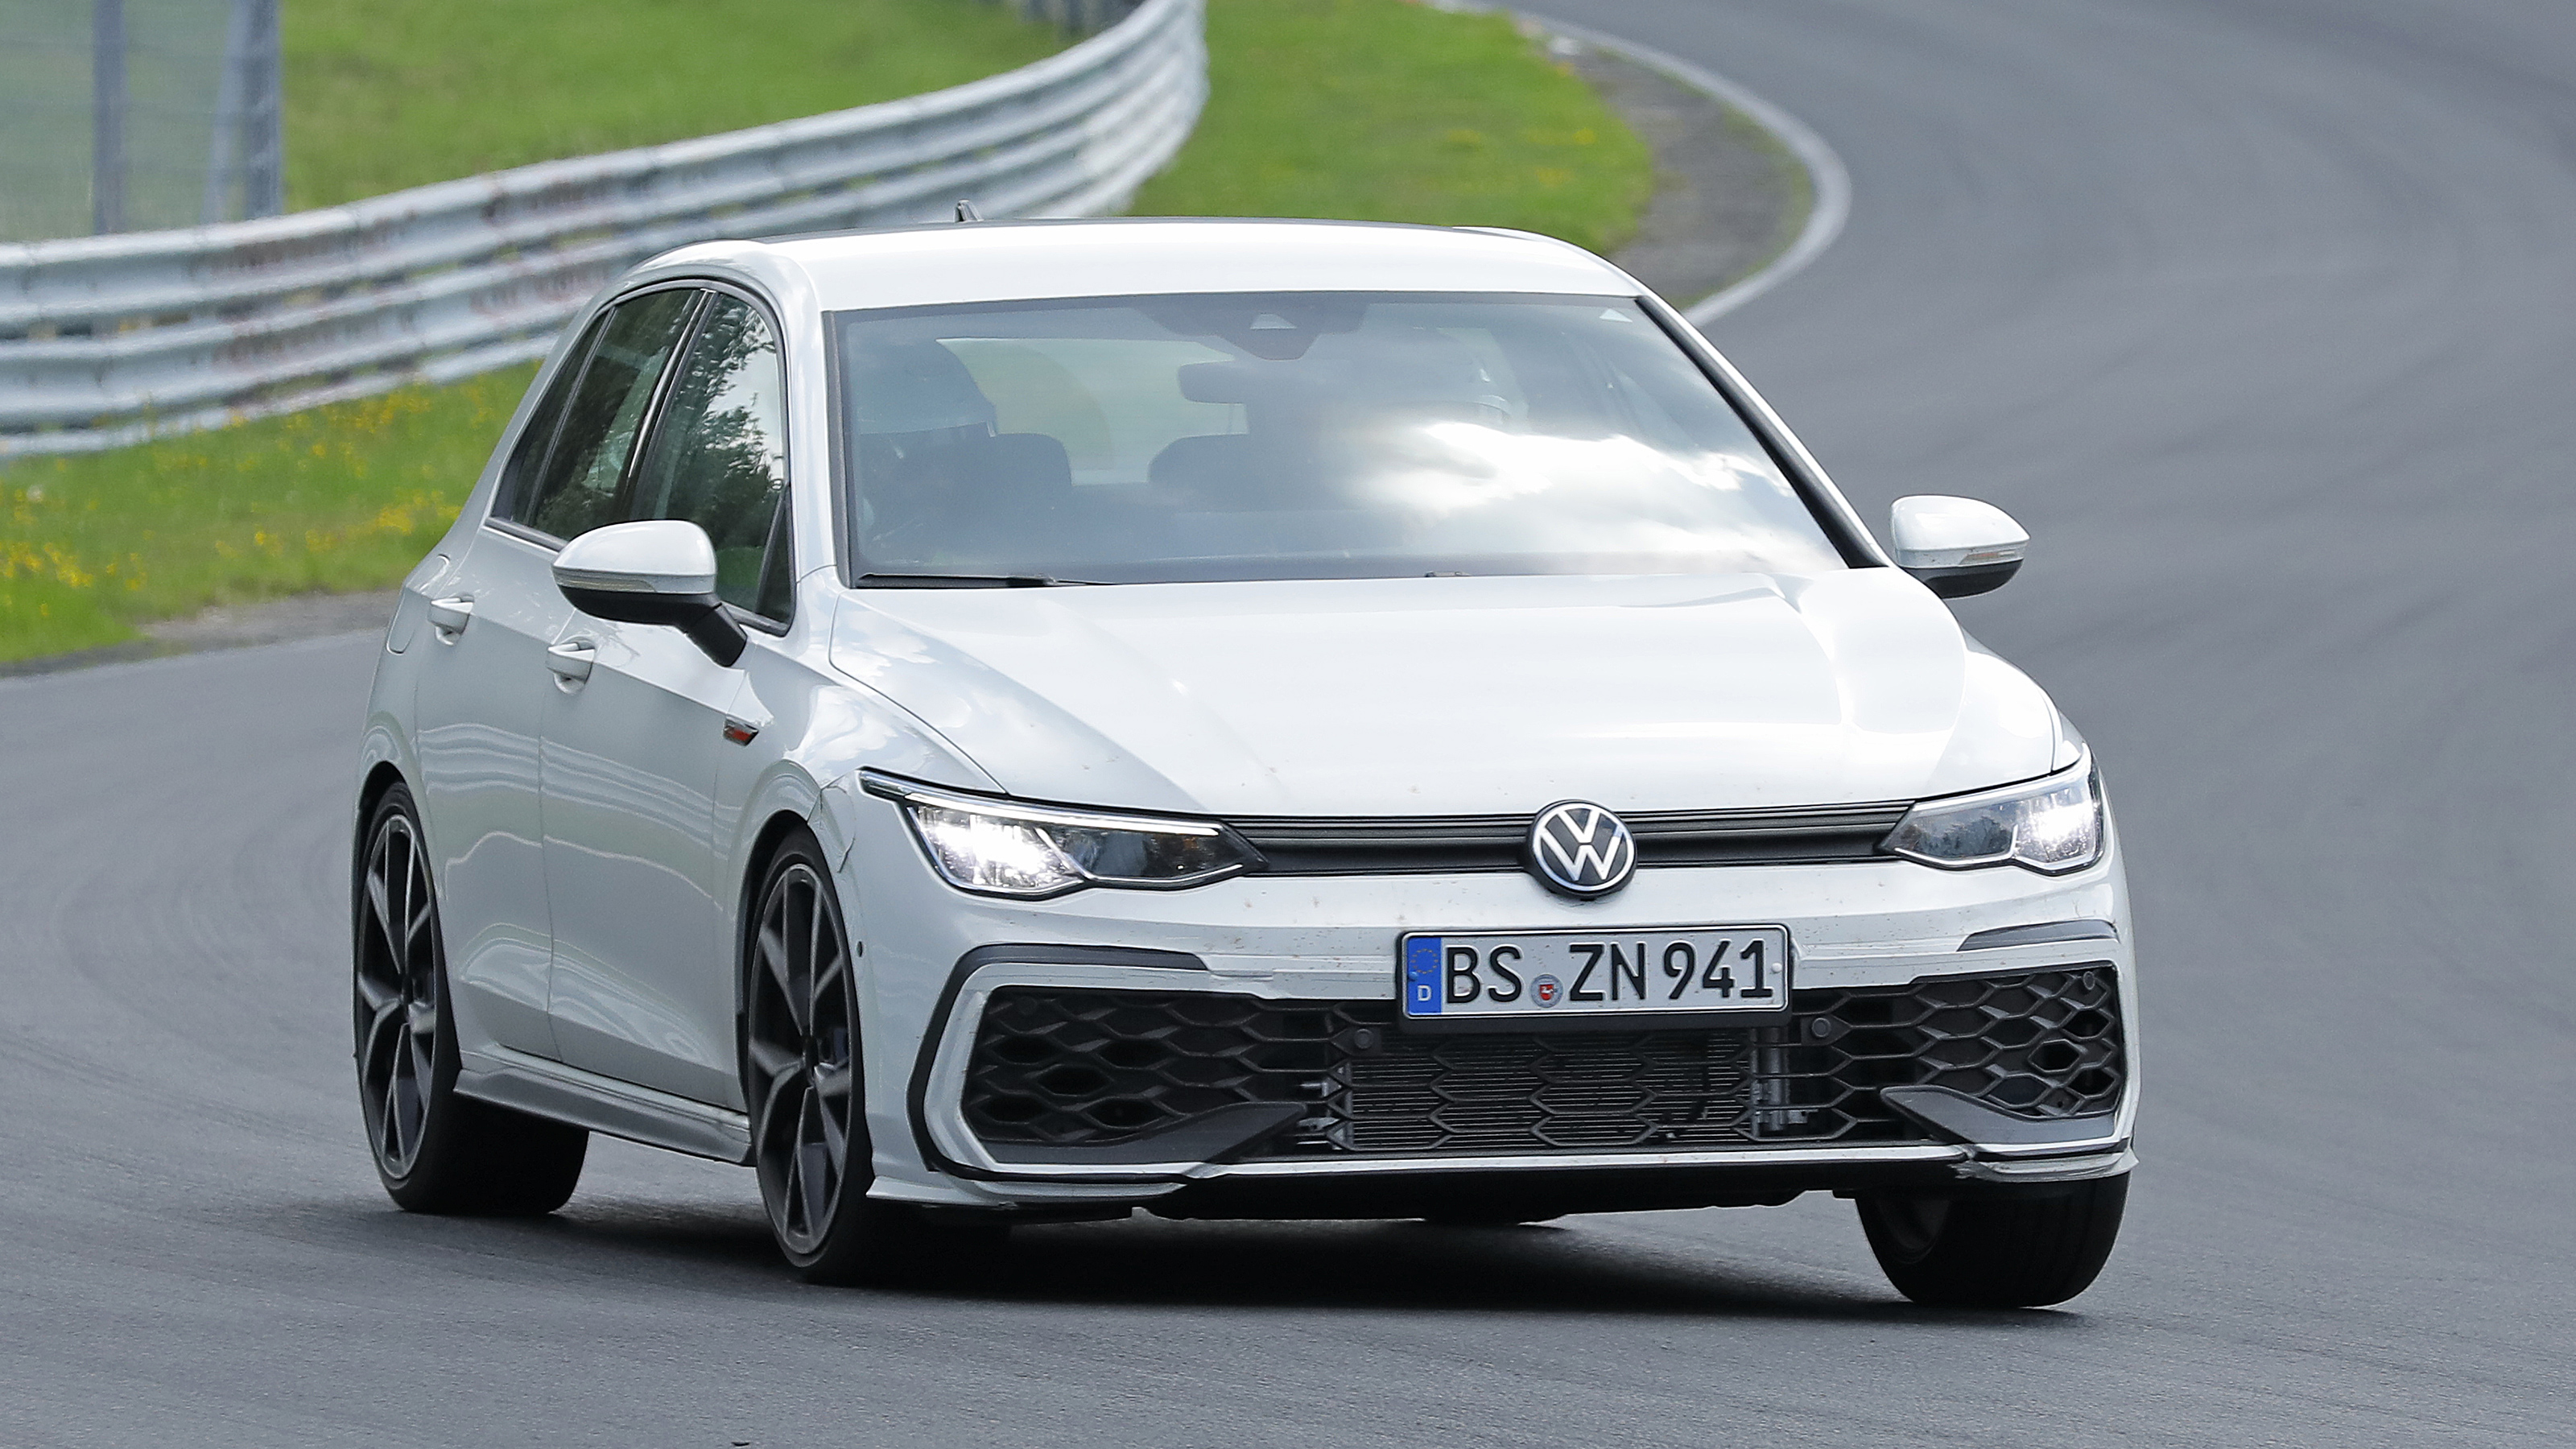 A new Volkswagen Golf GTI is on the way to address the Mk8's key flaw